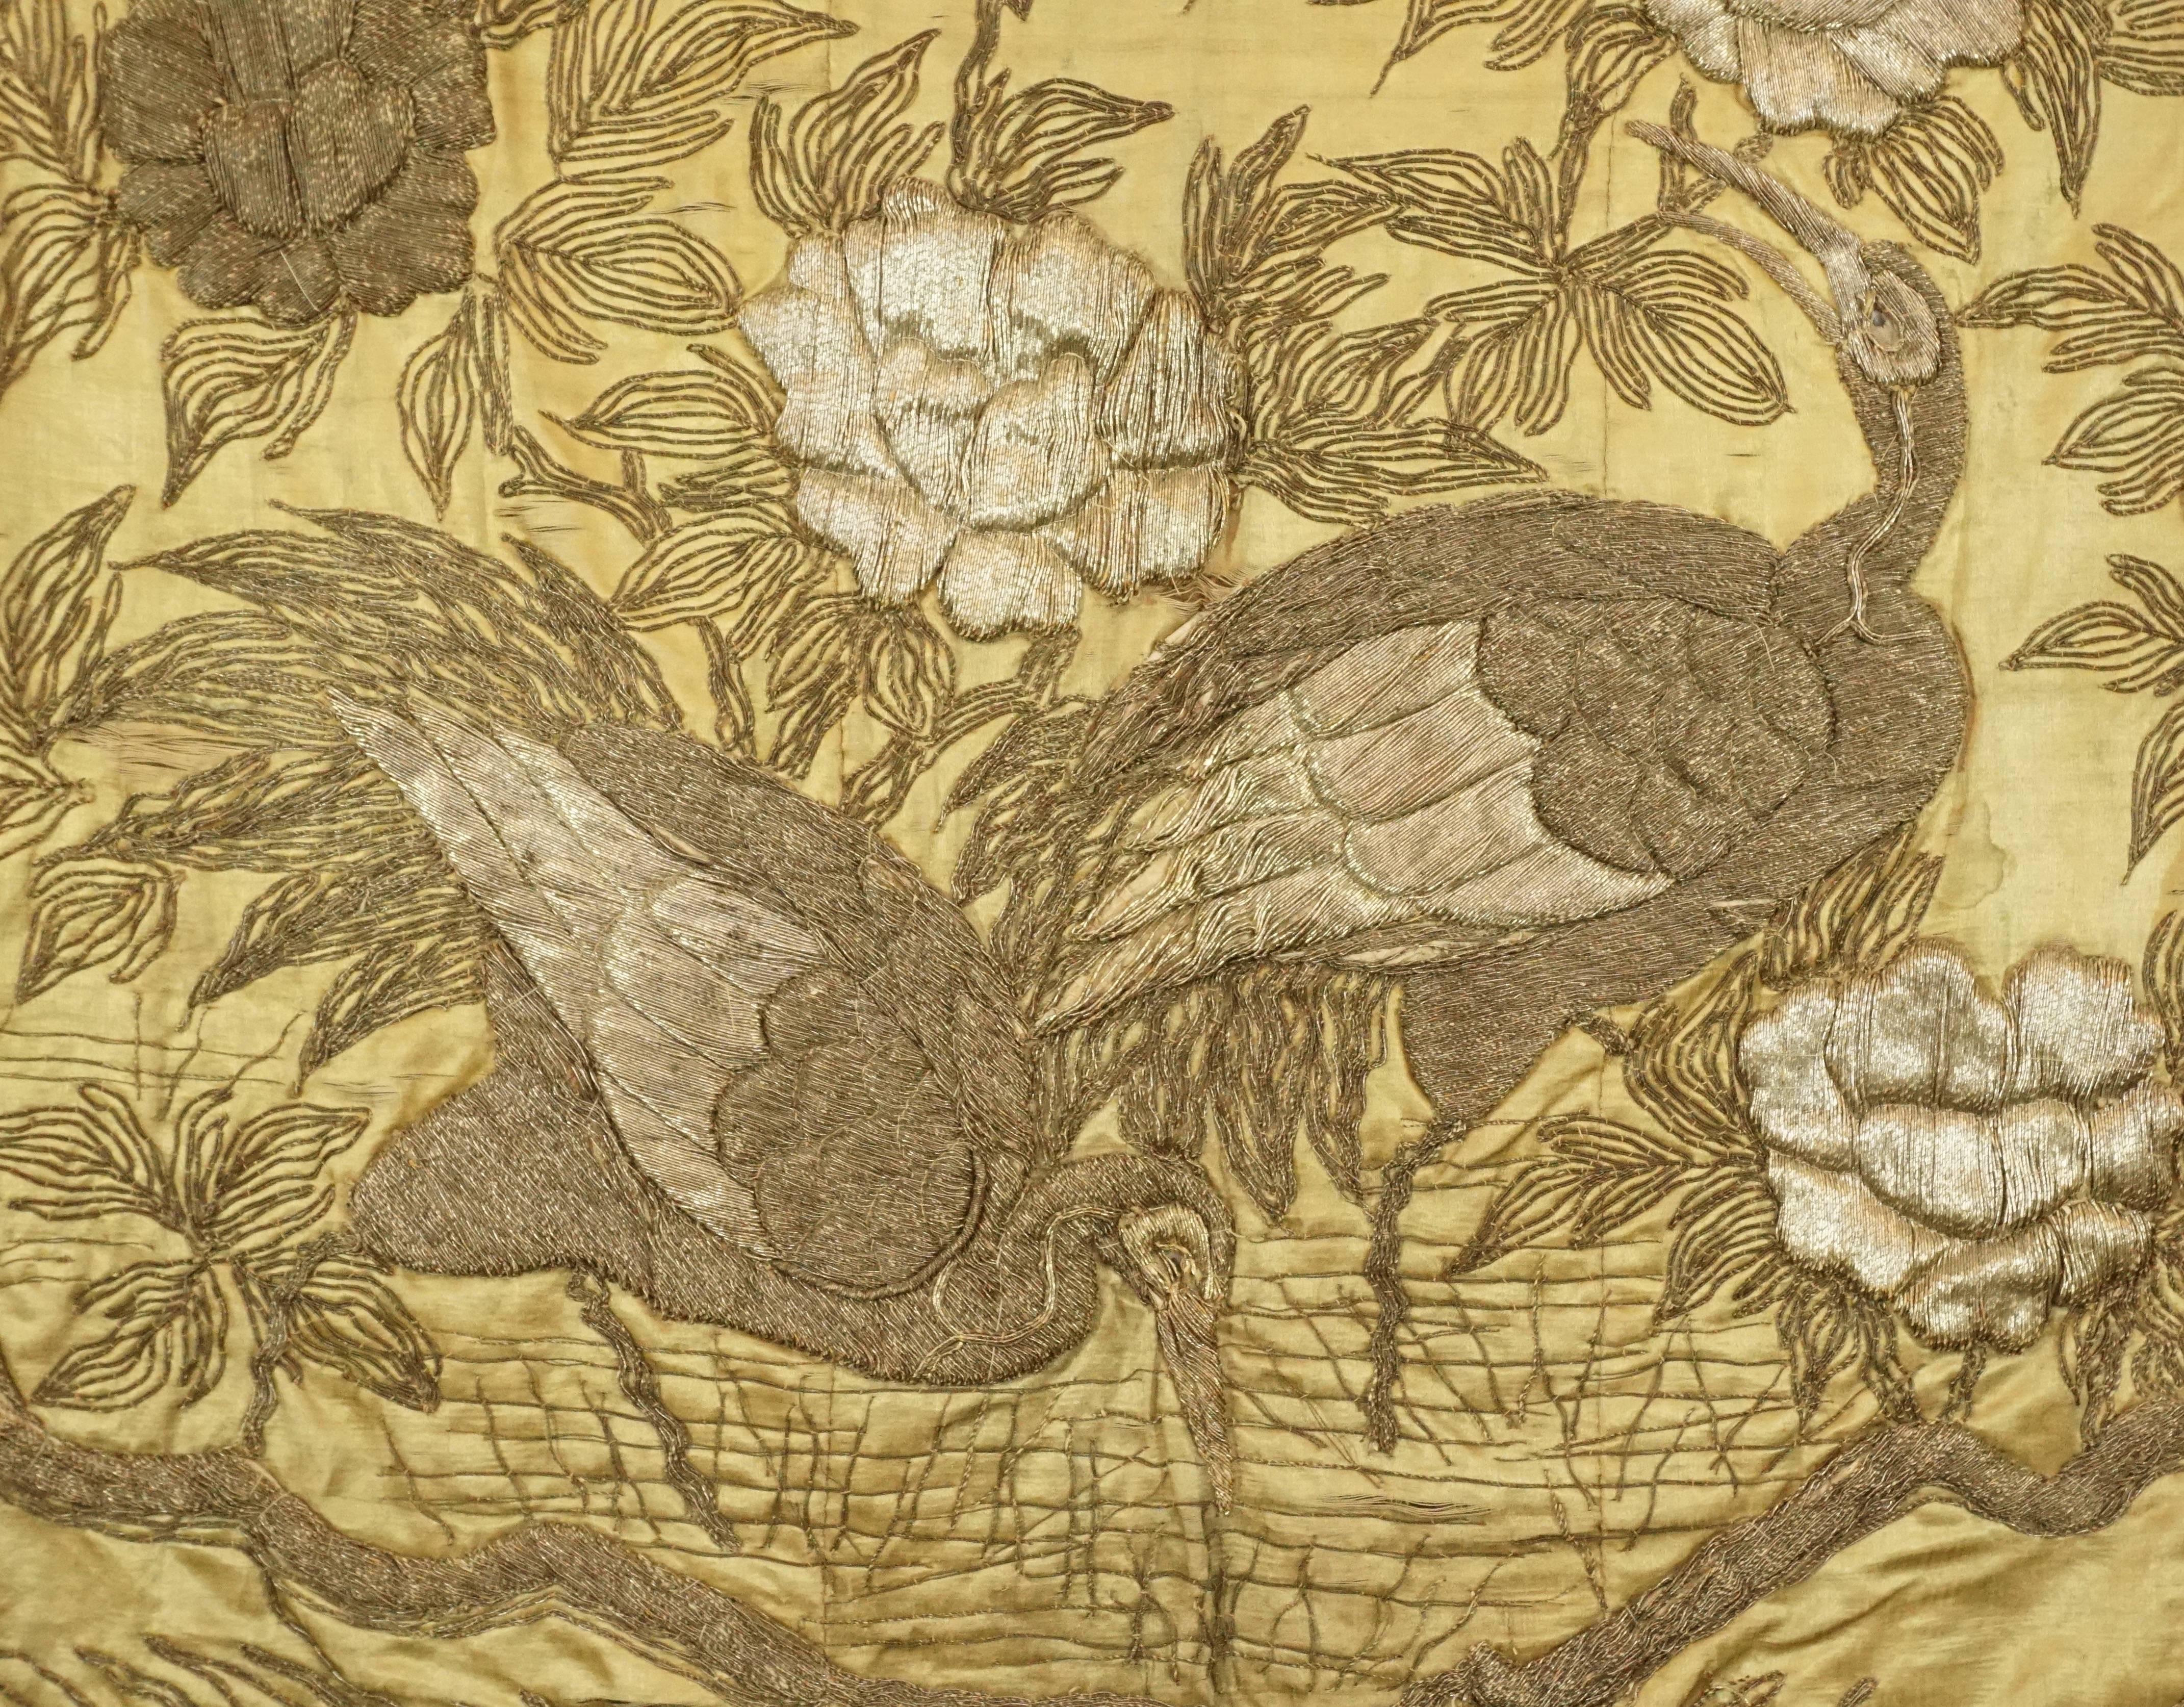 Hand-Crafted Japanese Meiji Period Silver Embroidery On Silk Of Hawk Attacking White Cranes